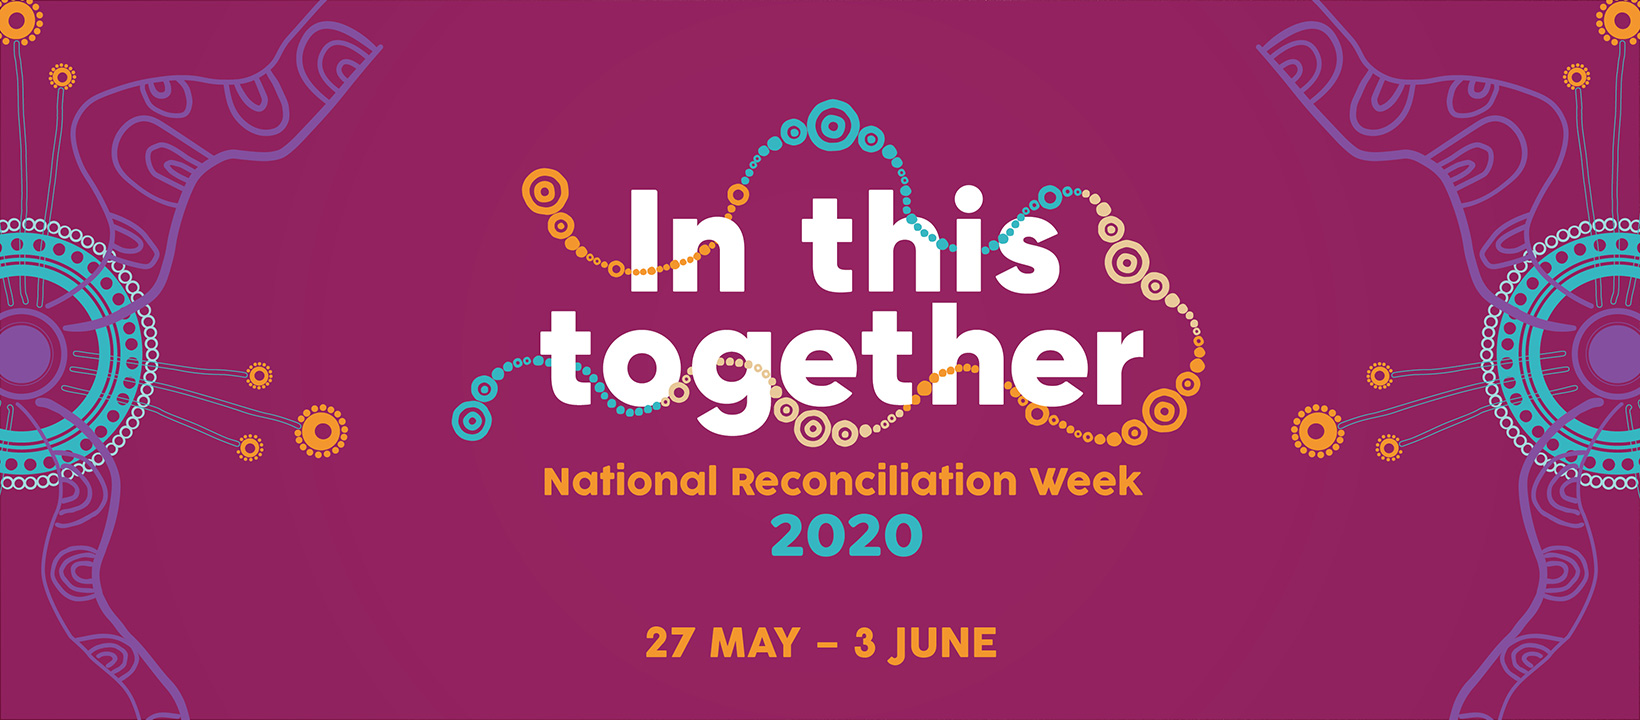 Celebrating National Reconciliation Week 2020: In This Together 